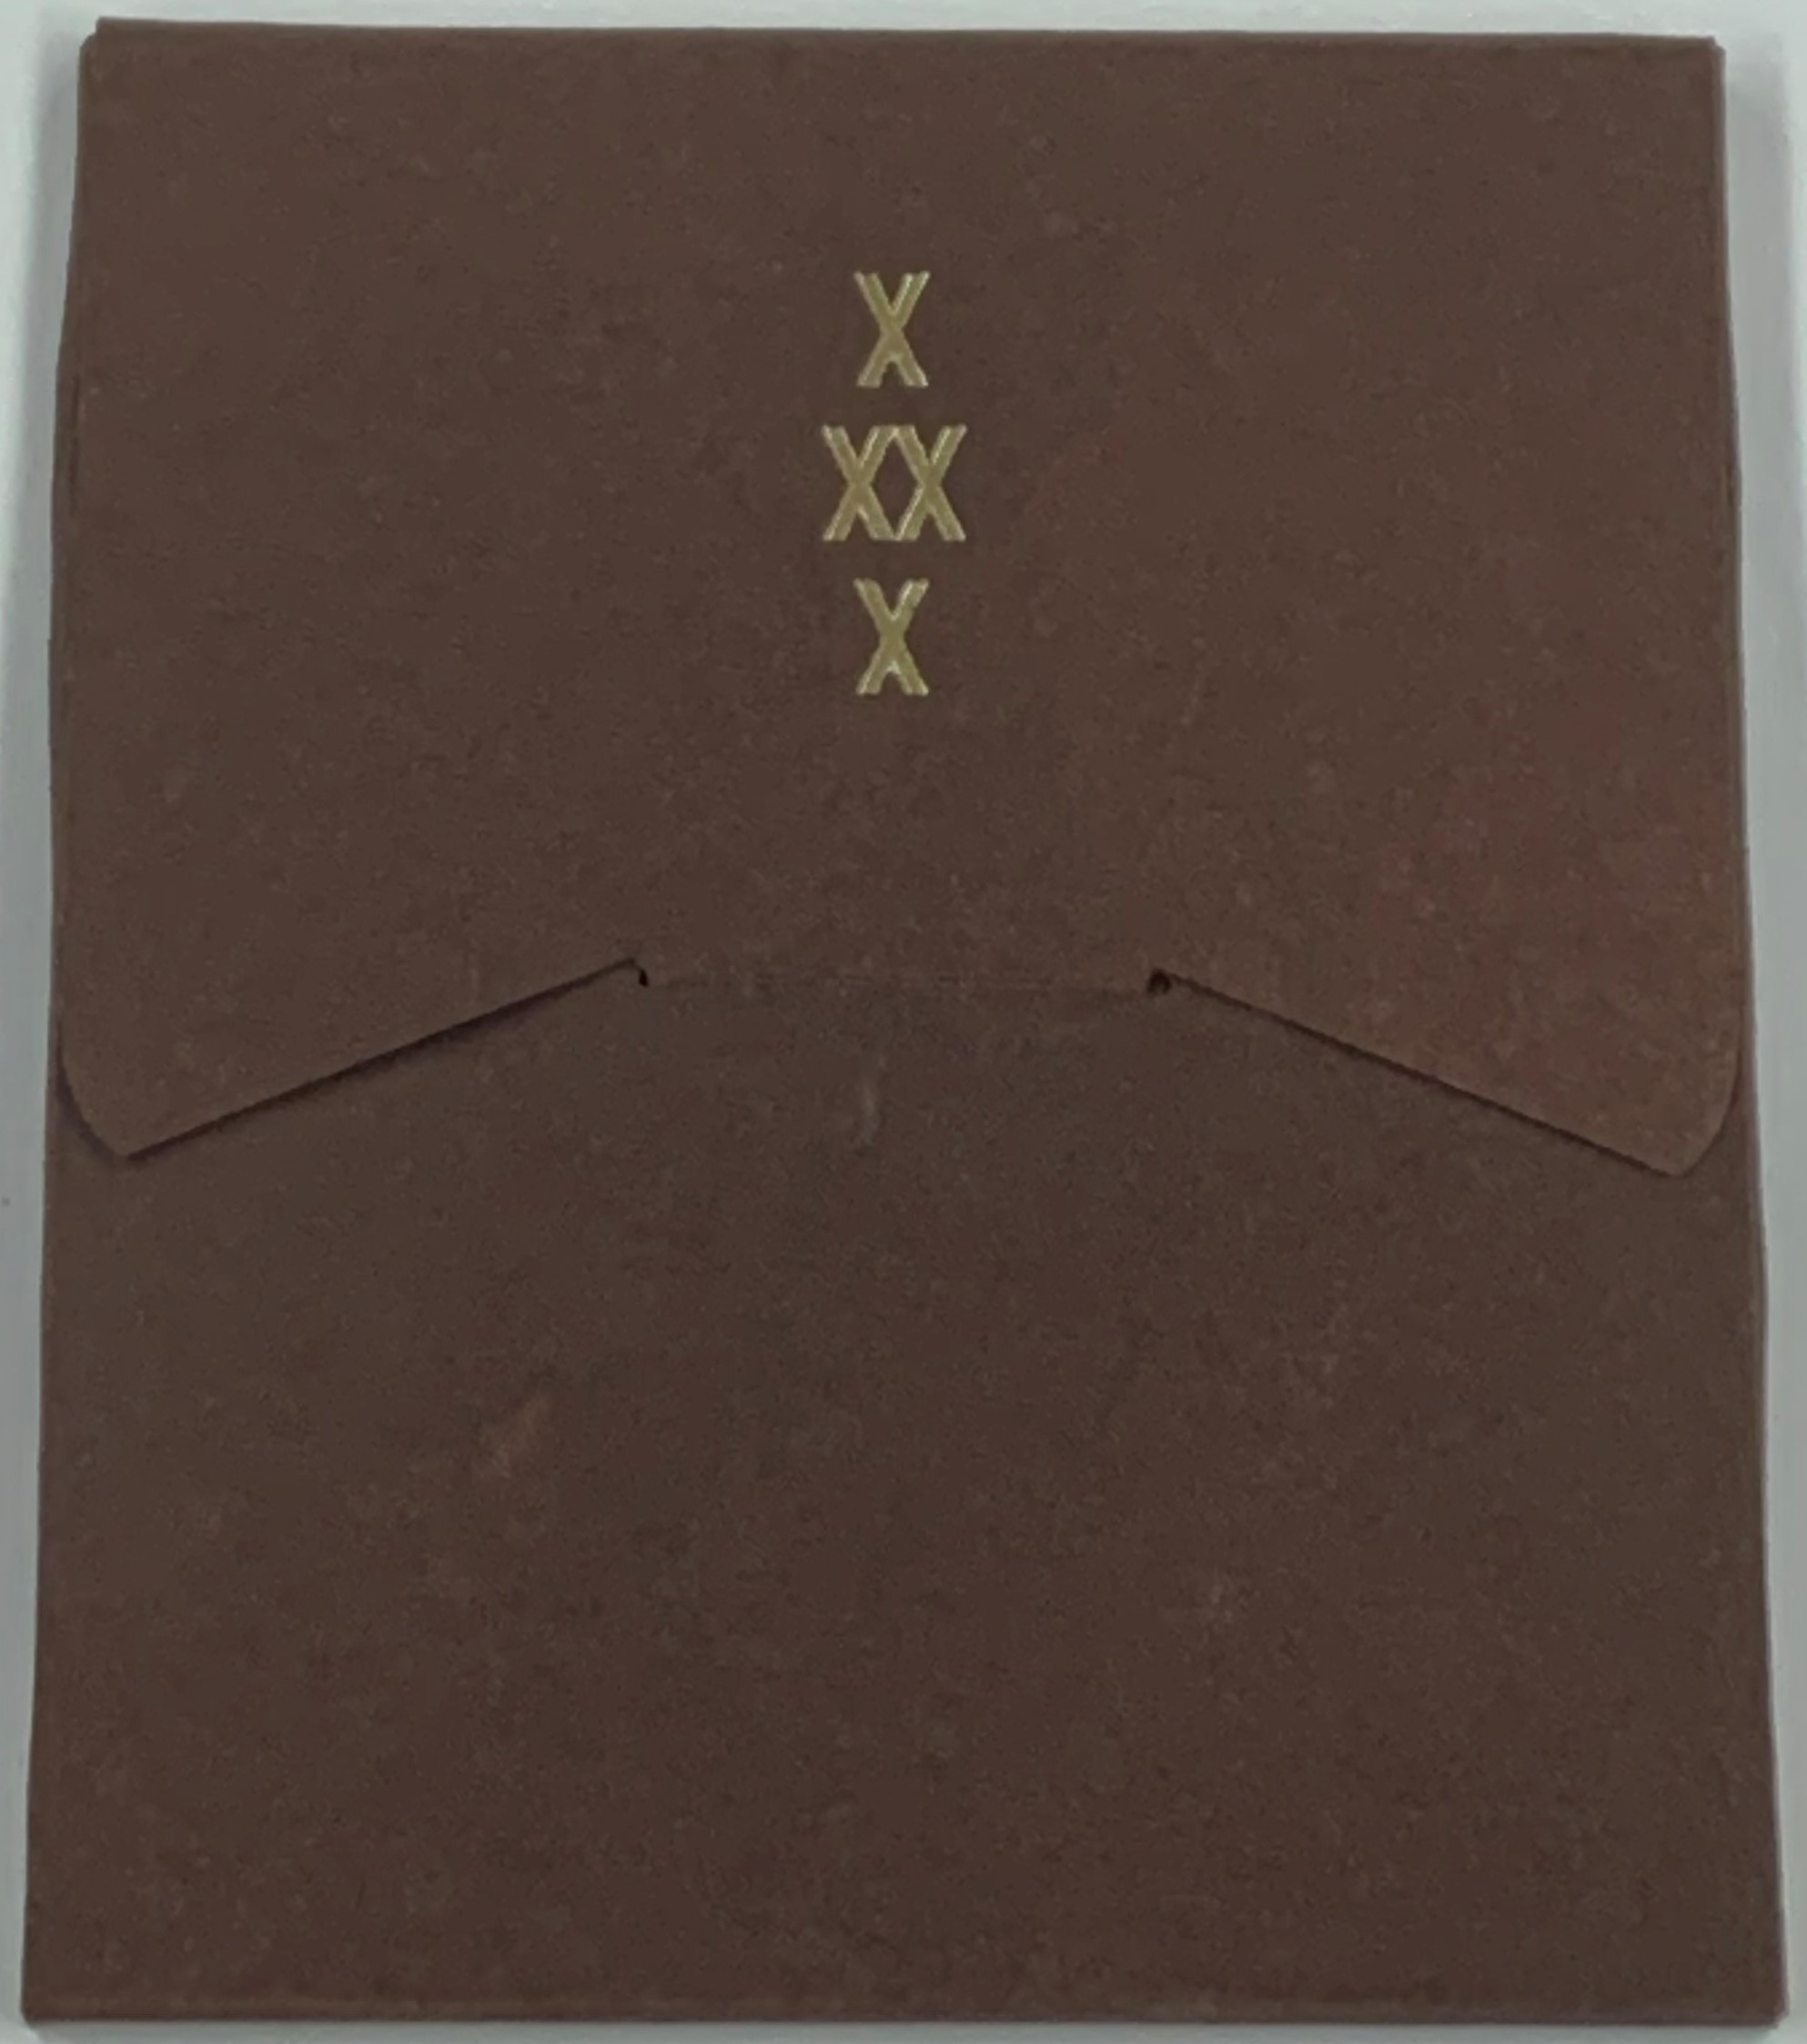 brown back cover of a wrapped enclosure with one flap inserted into the other in the middle and "X XX X" printed in the upper middle of the top flap